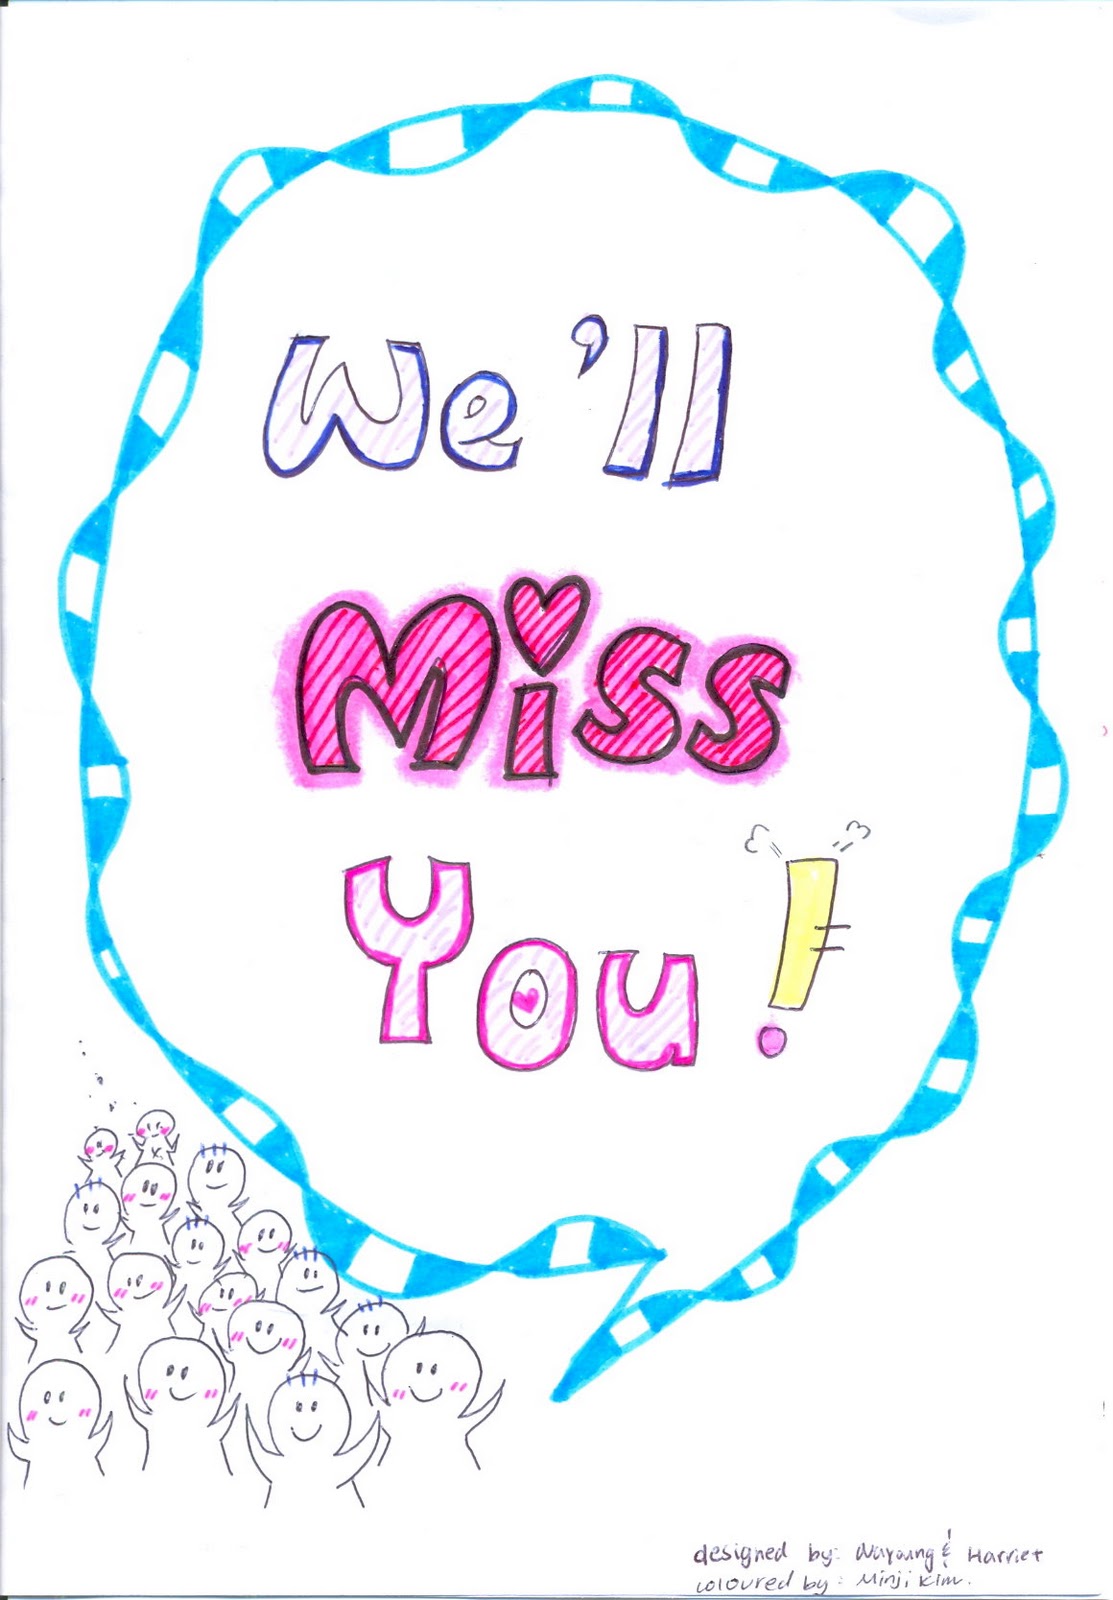 goodbye farewell clipart images